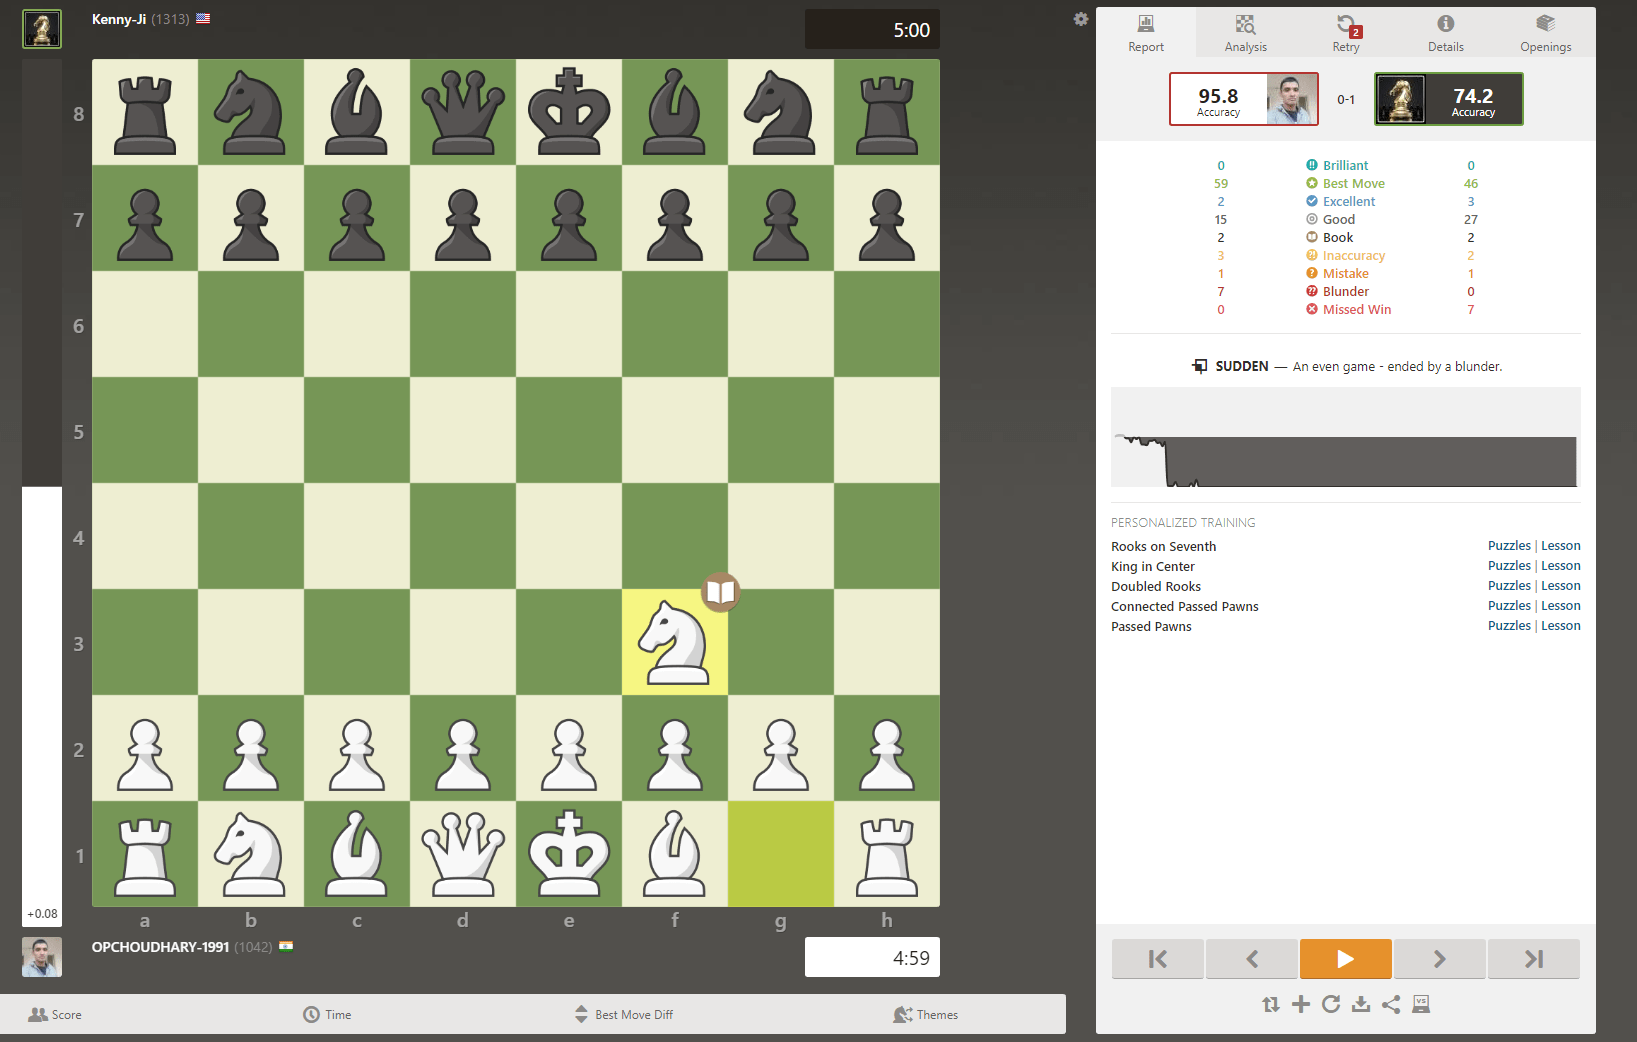 How is Accuracy in analysis determined? - Chess.com Member Support